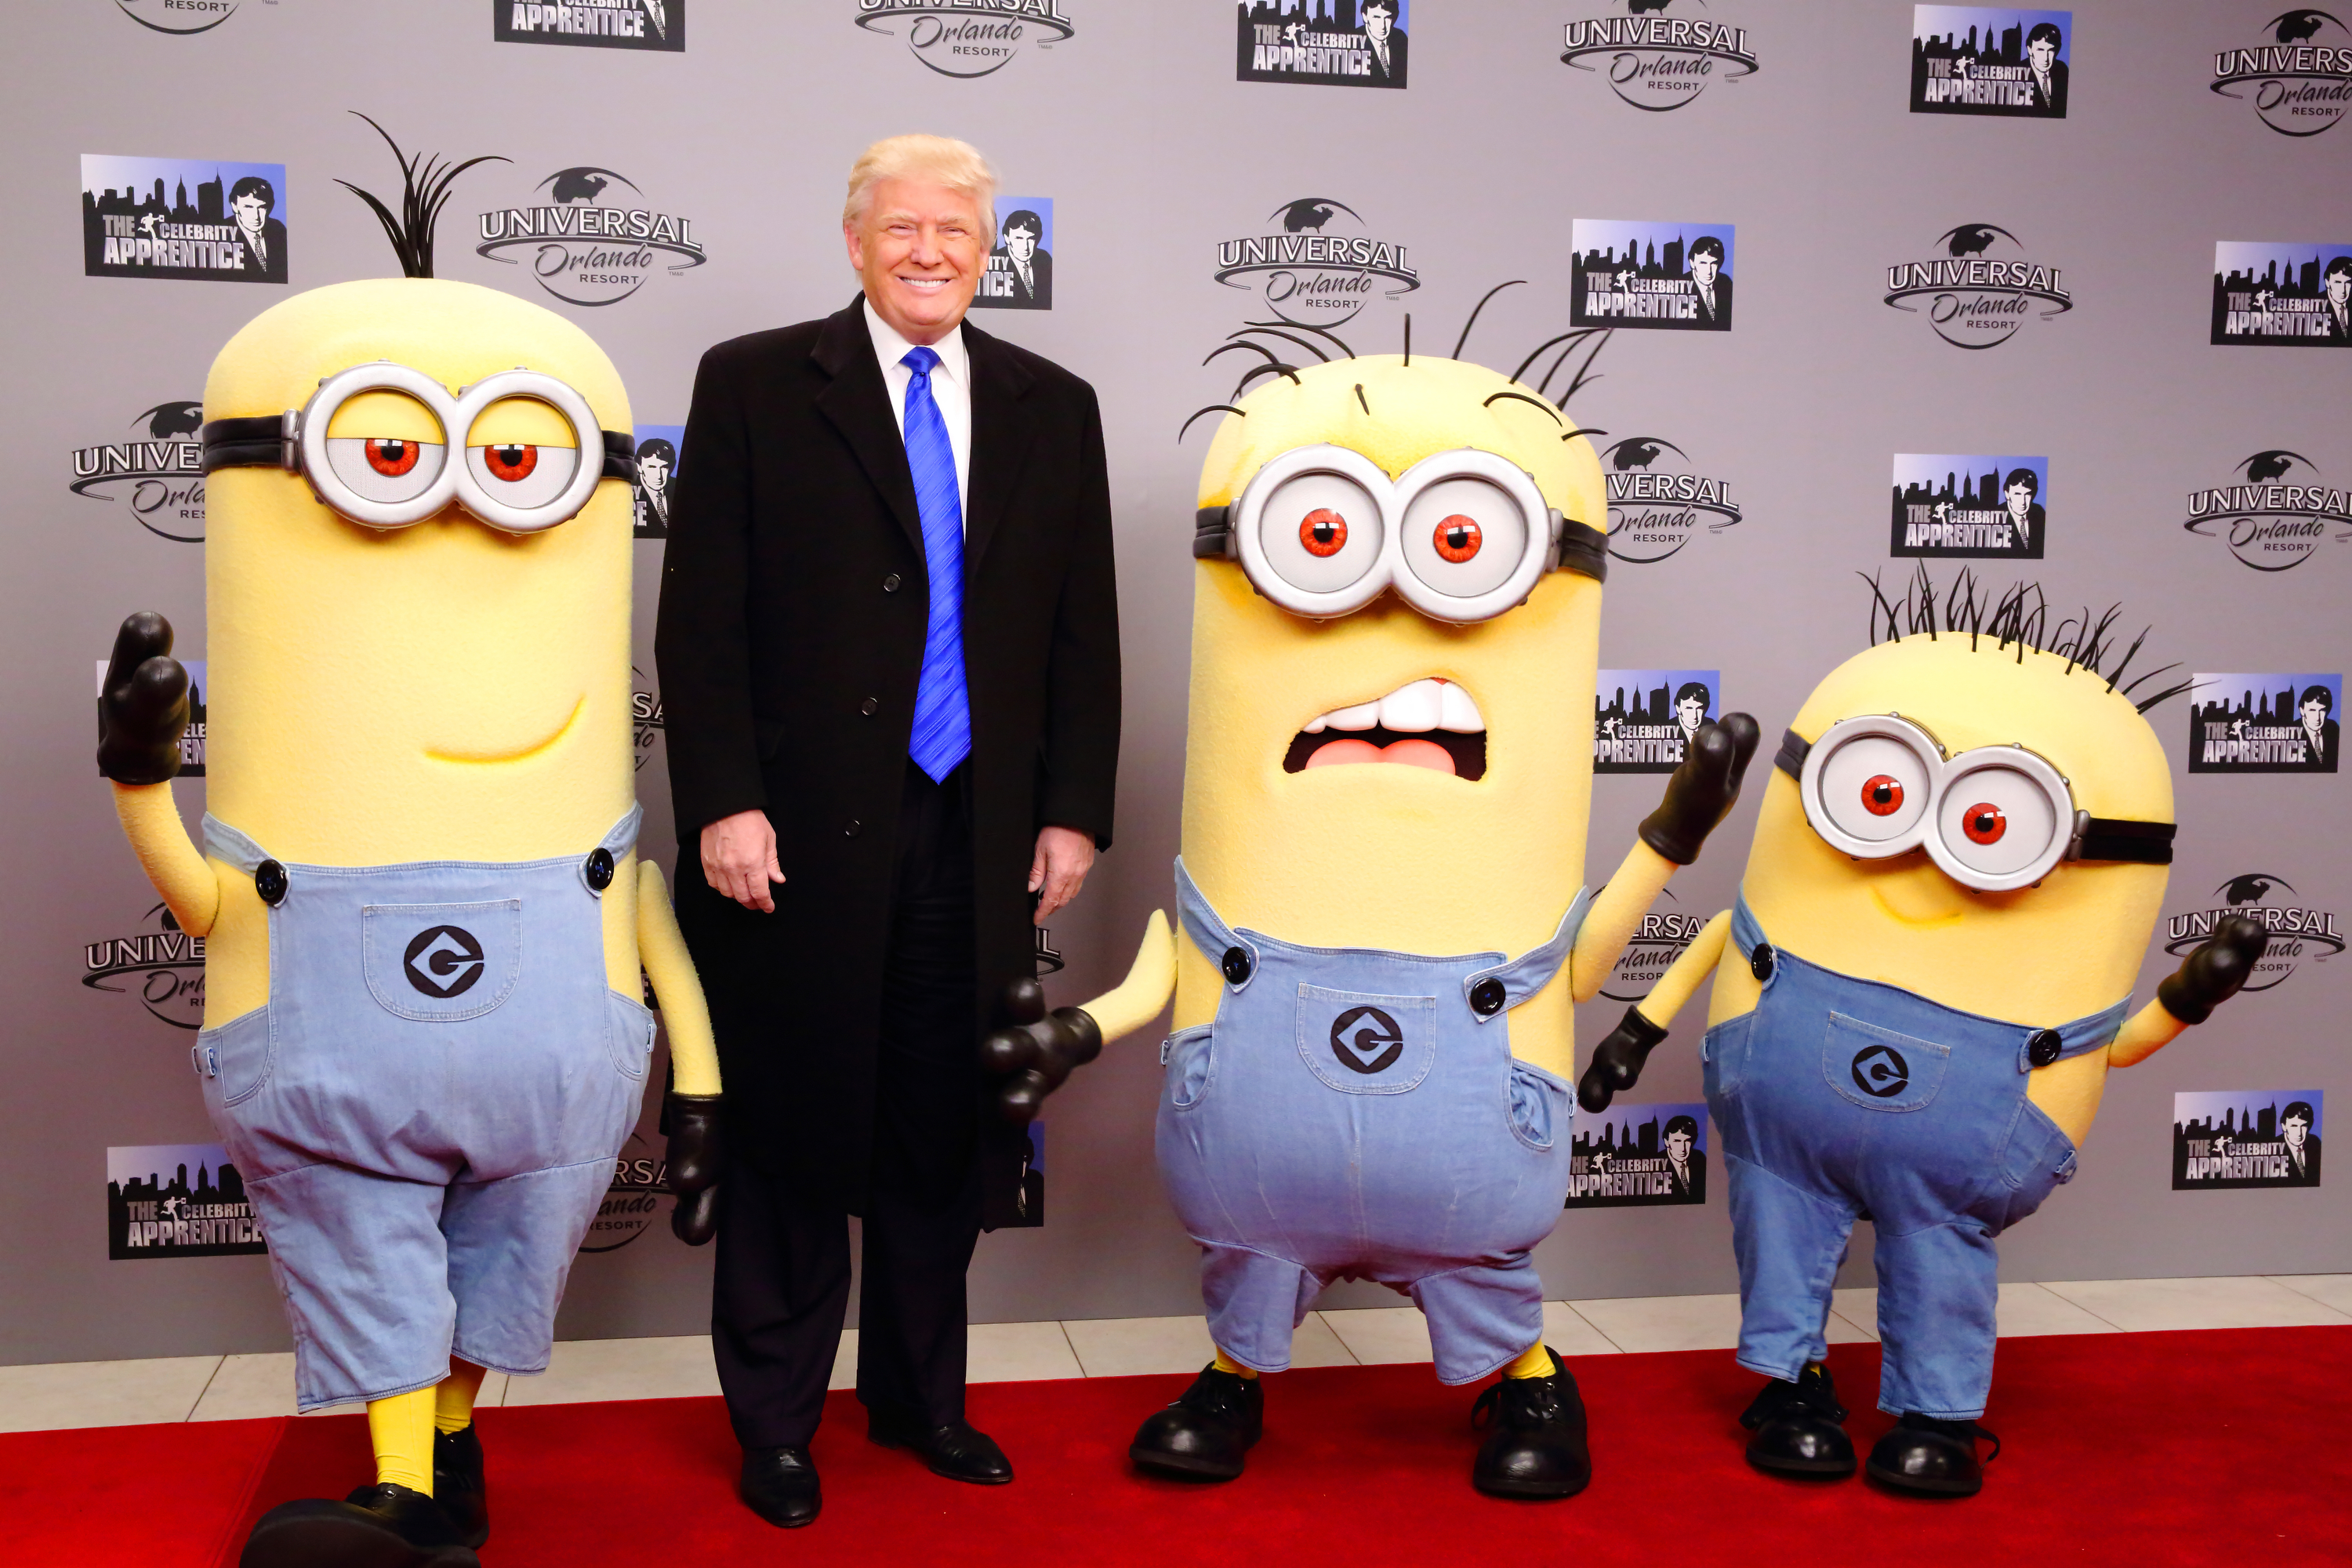 Donald Trump is surrounded by life-size “minions” — yellow humanoid helpers from the Despicable Me movie franchise — in an a symbolic approximation of his primary opposition.